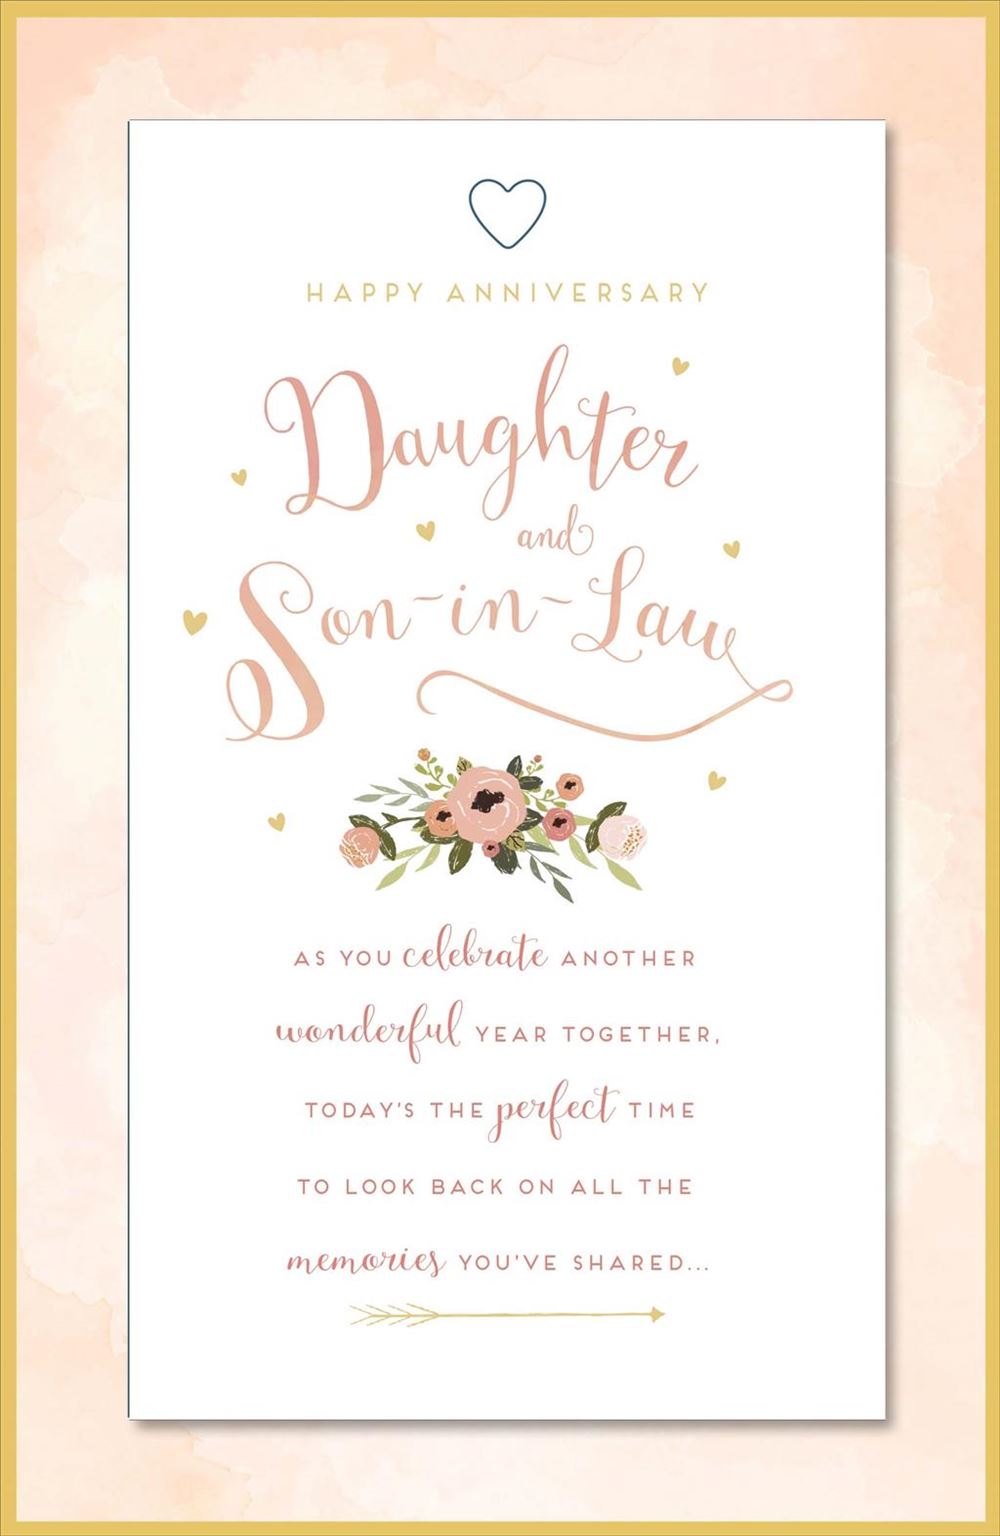 Happy Wedding Anniversary Daughter and Son-in-Law Card